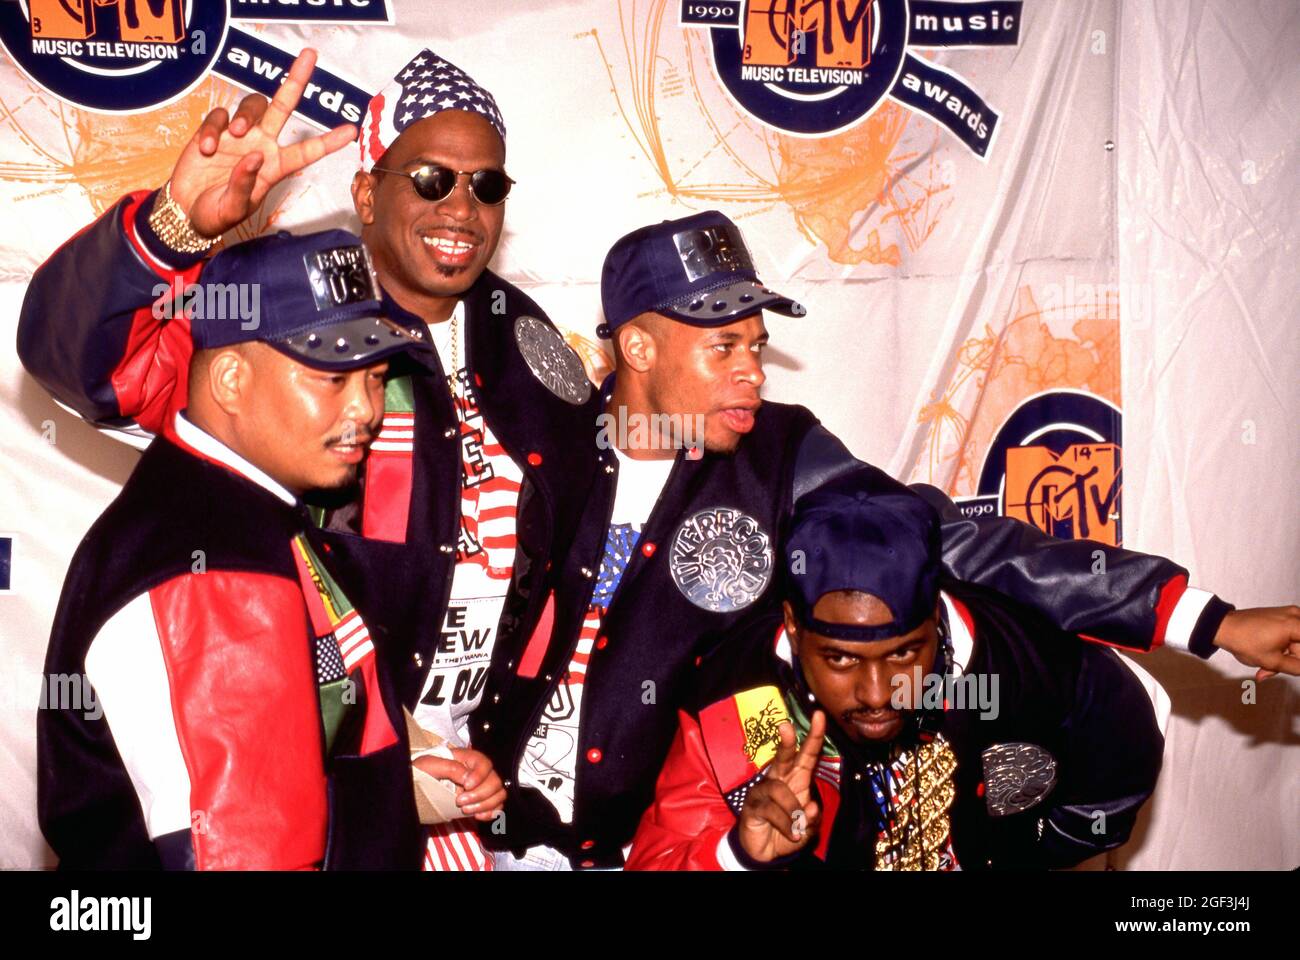 2 Live Crew at the 1990 MTV Video Music Awards September 6, 1990 Credit ...